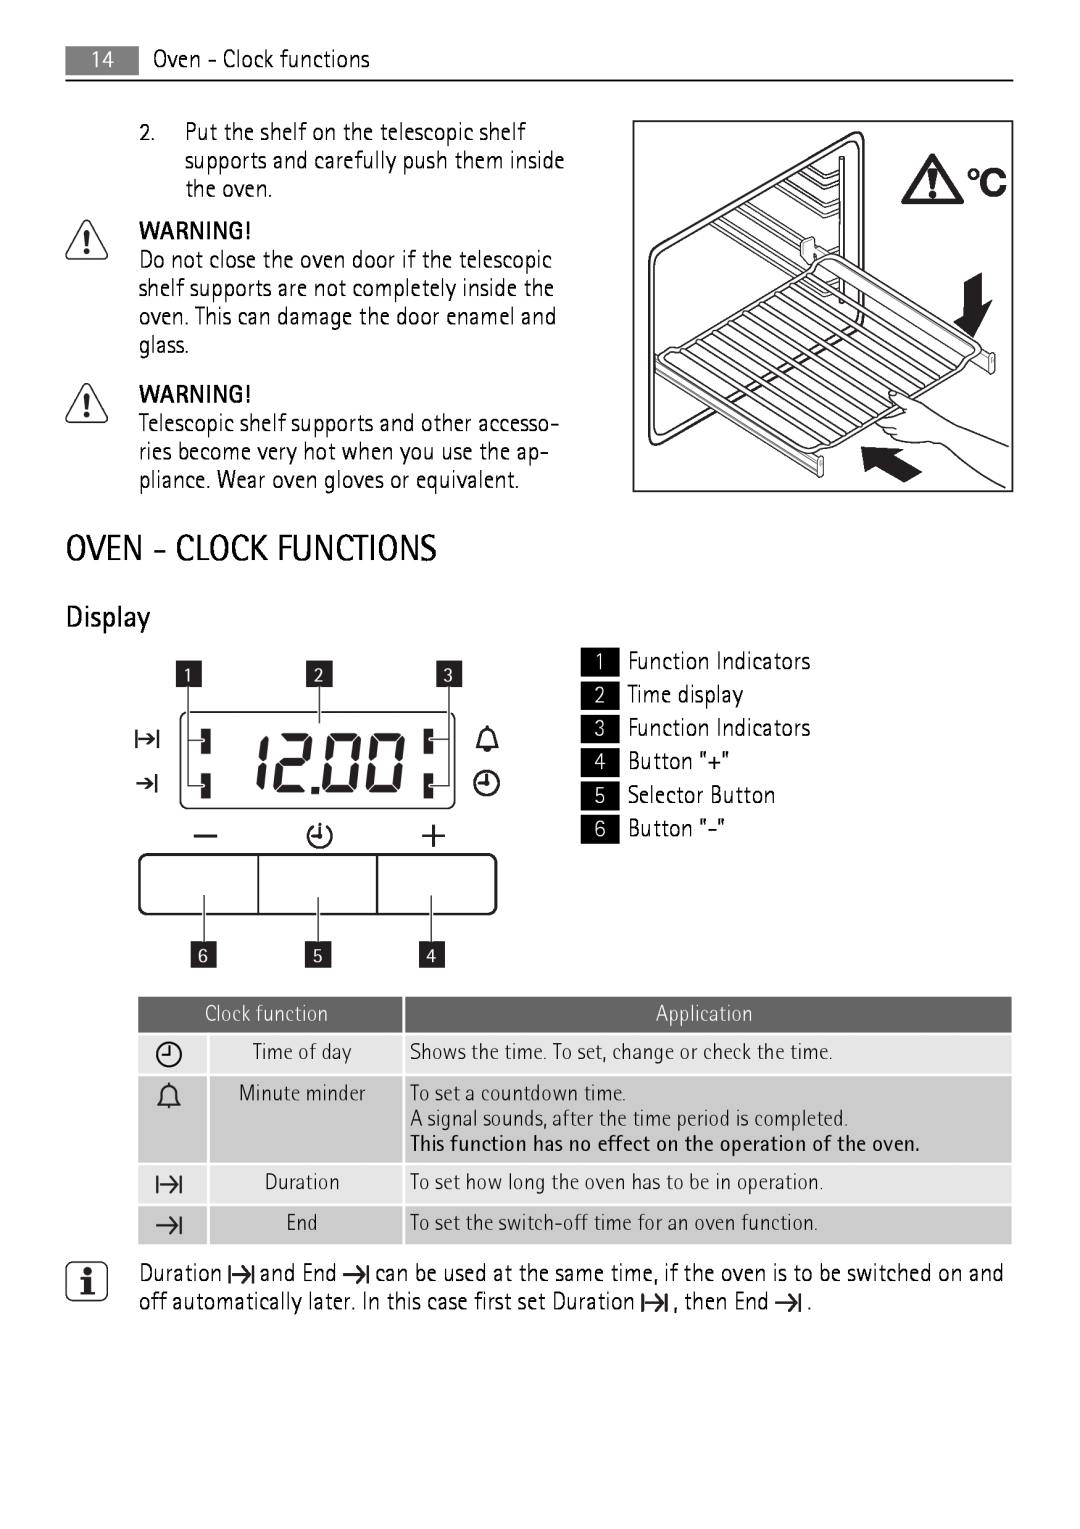 AEG 41056VH-MN user manual Oven - Clock Functions, Time display, Button +, Selector Button 